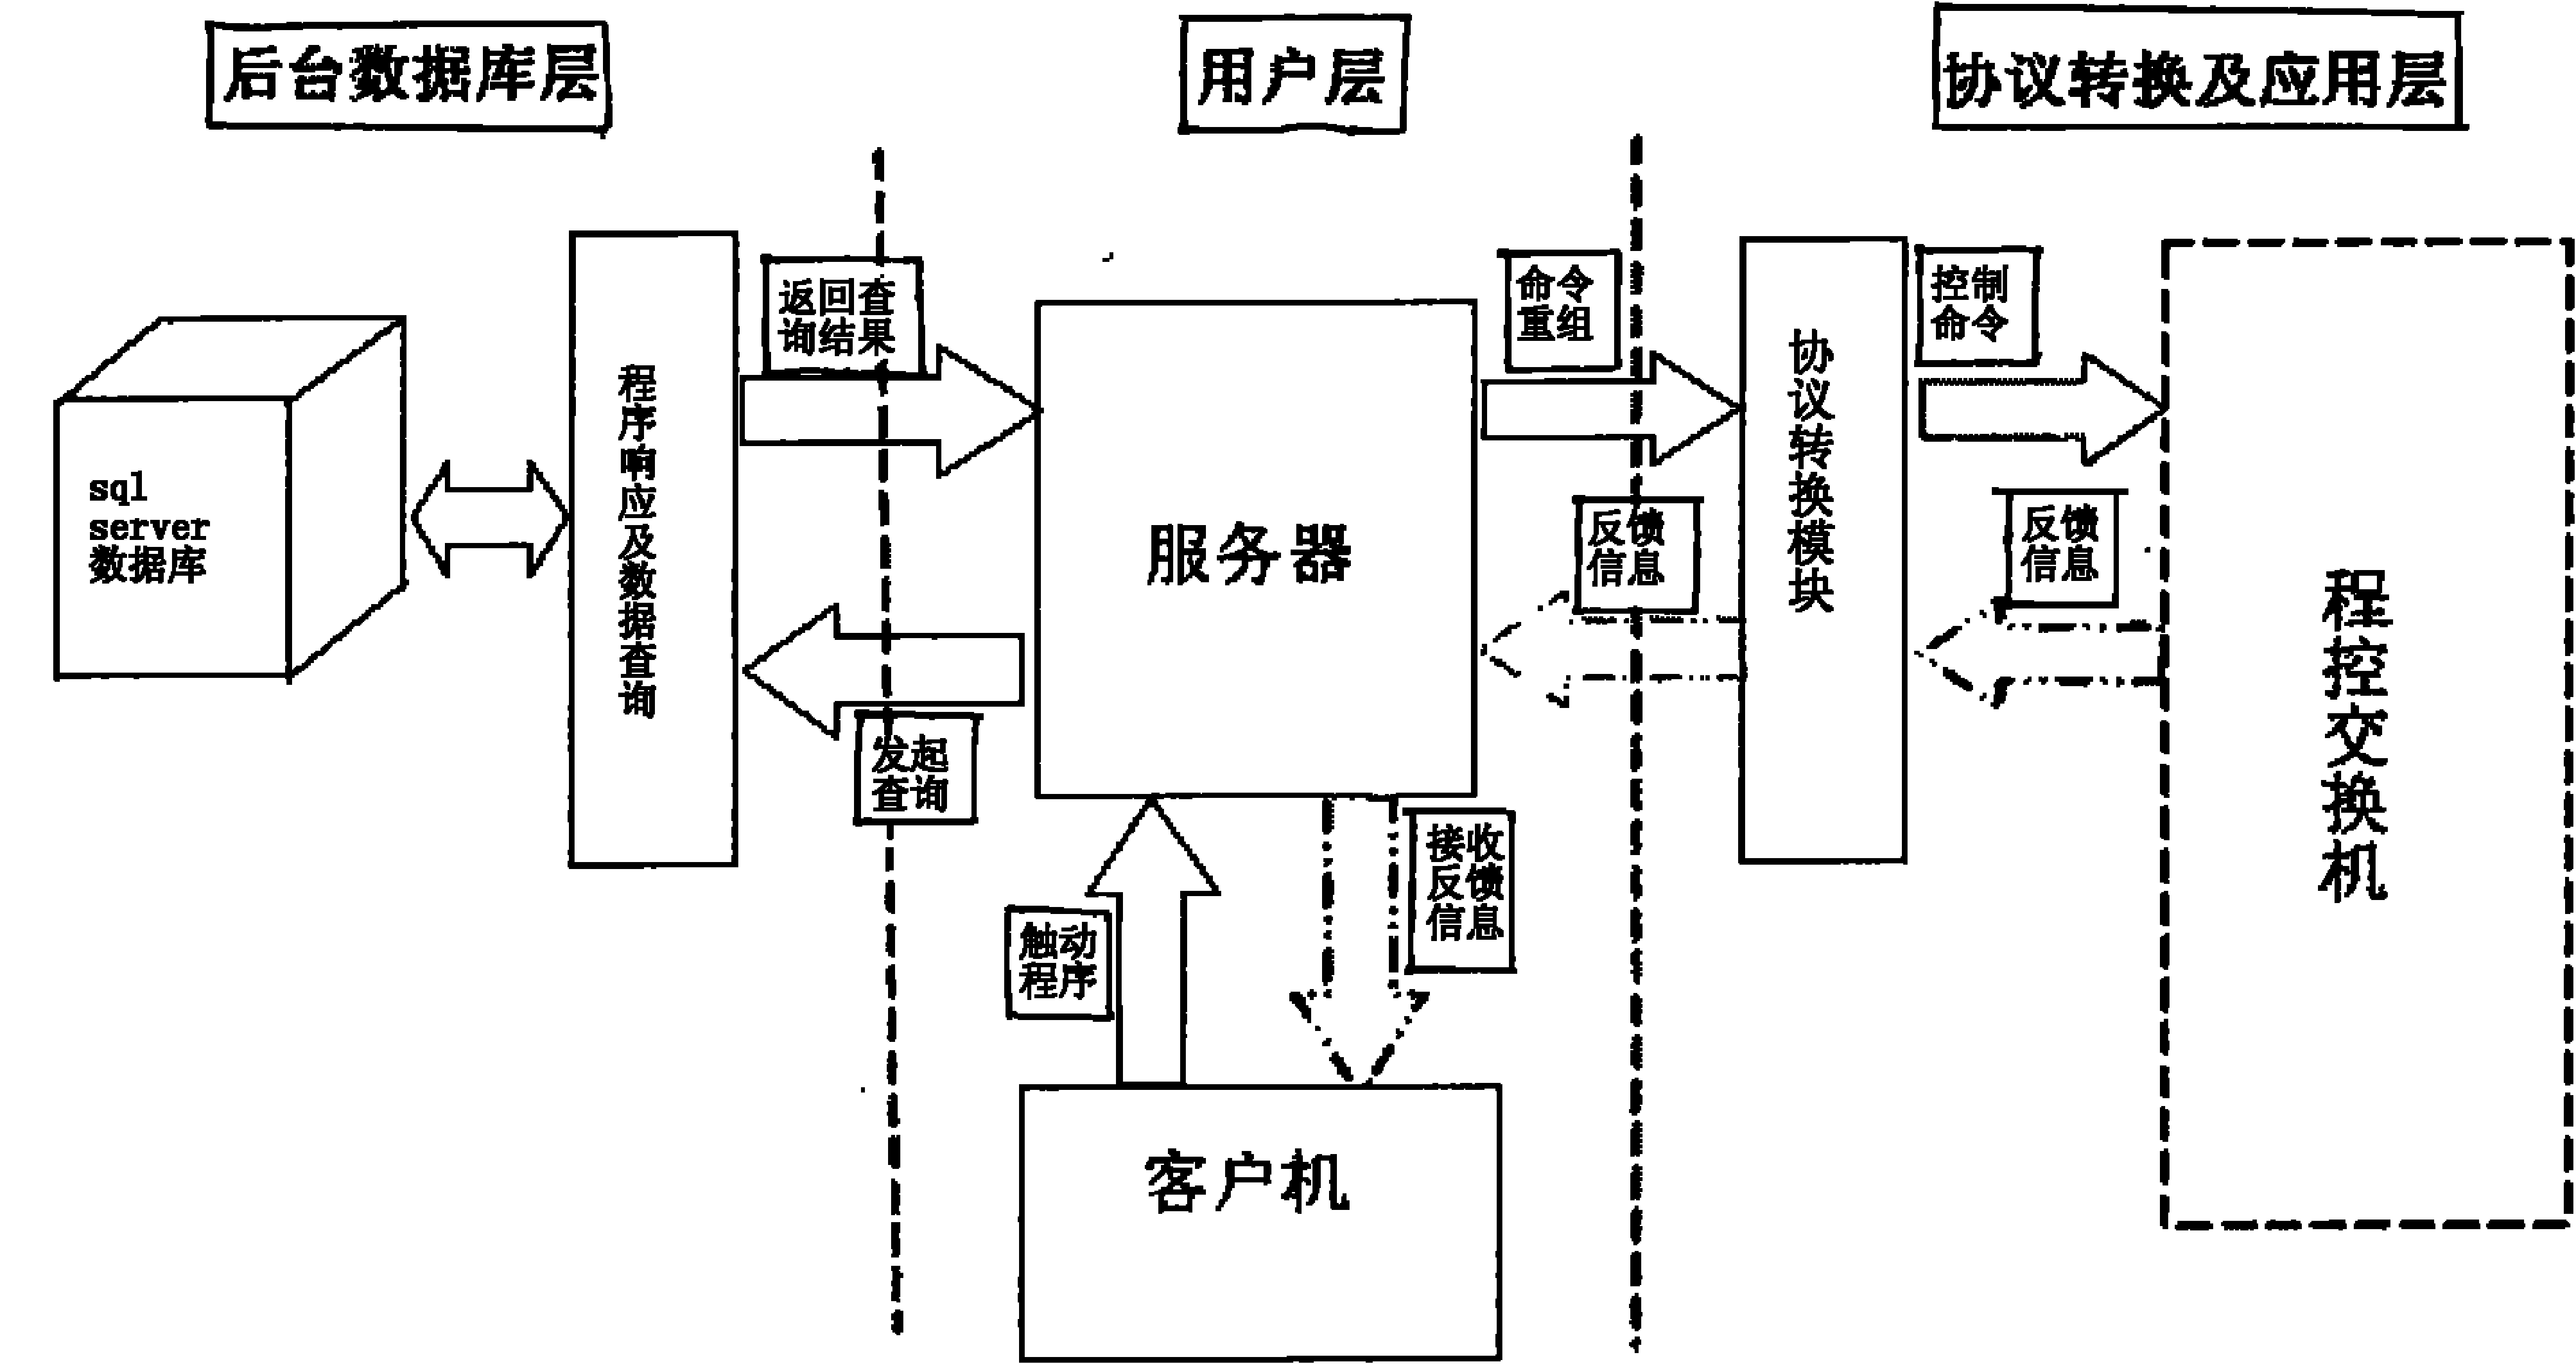 Method for developing management system of program-controlled switch by using asp technology